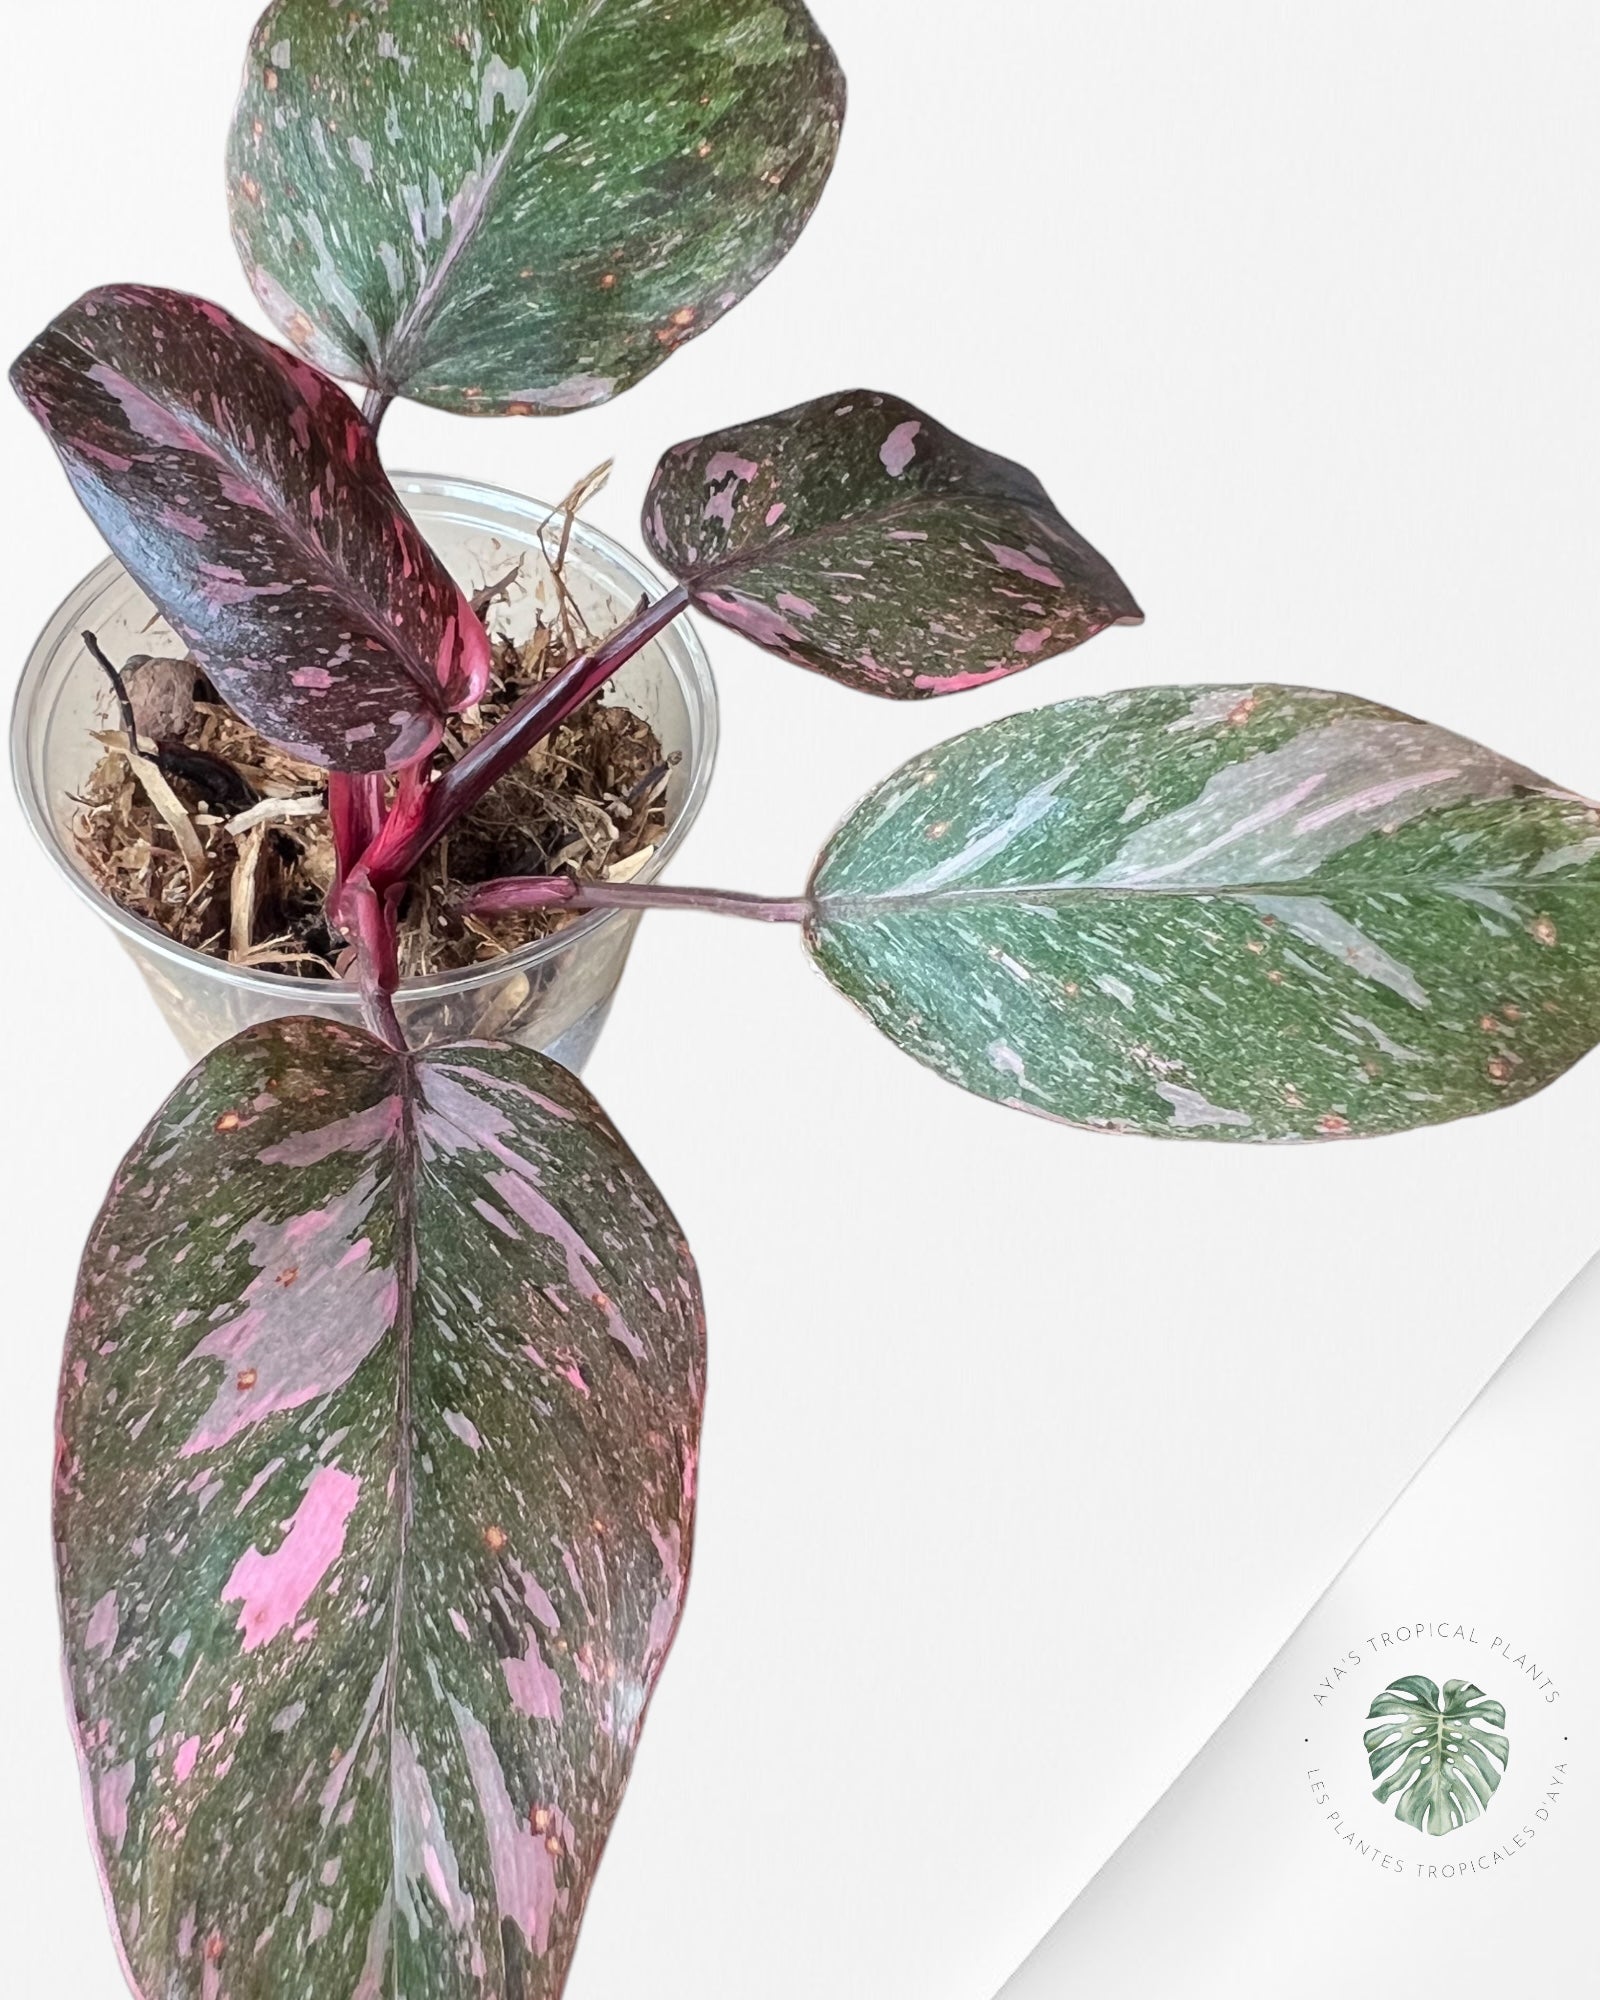 Philodendron Pink Galaxy